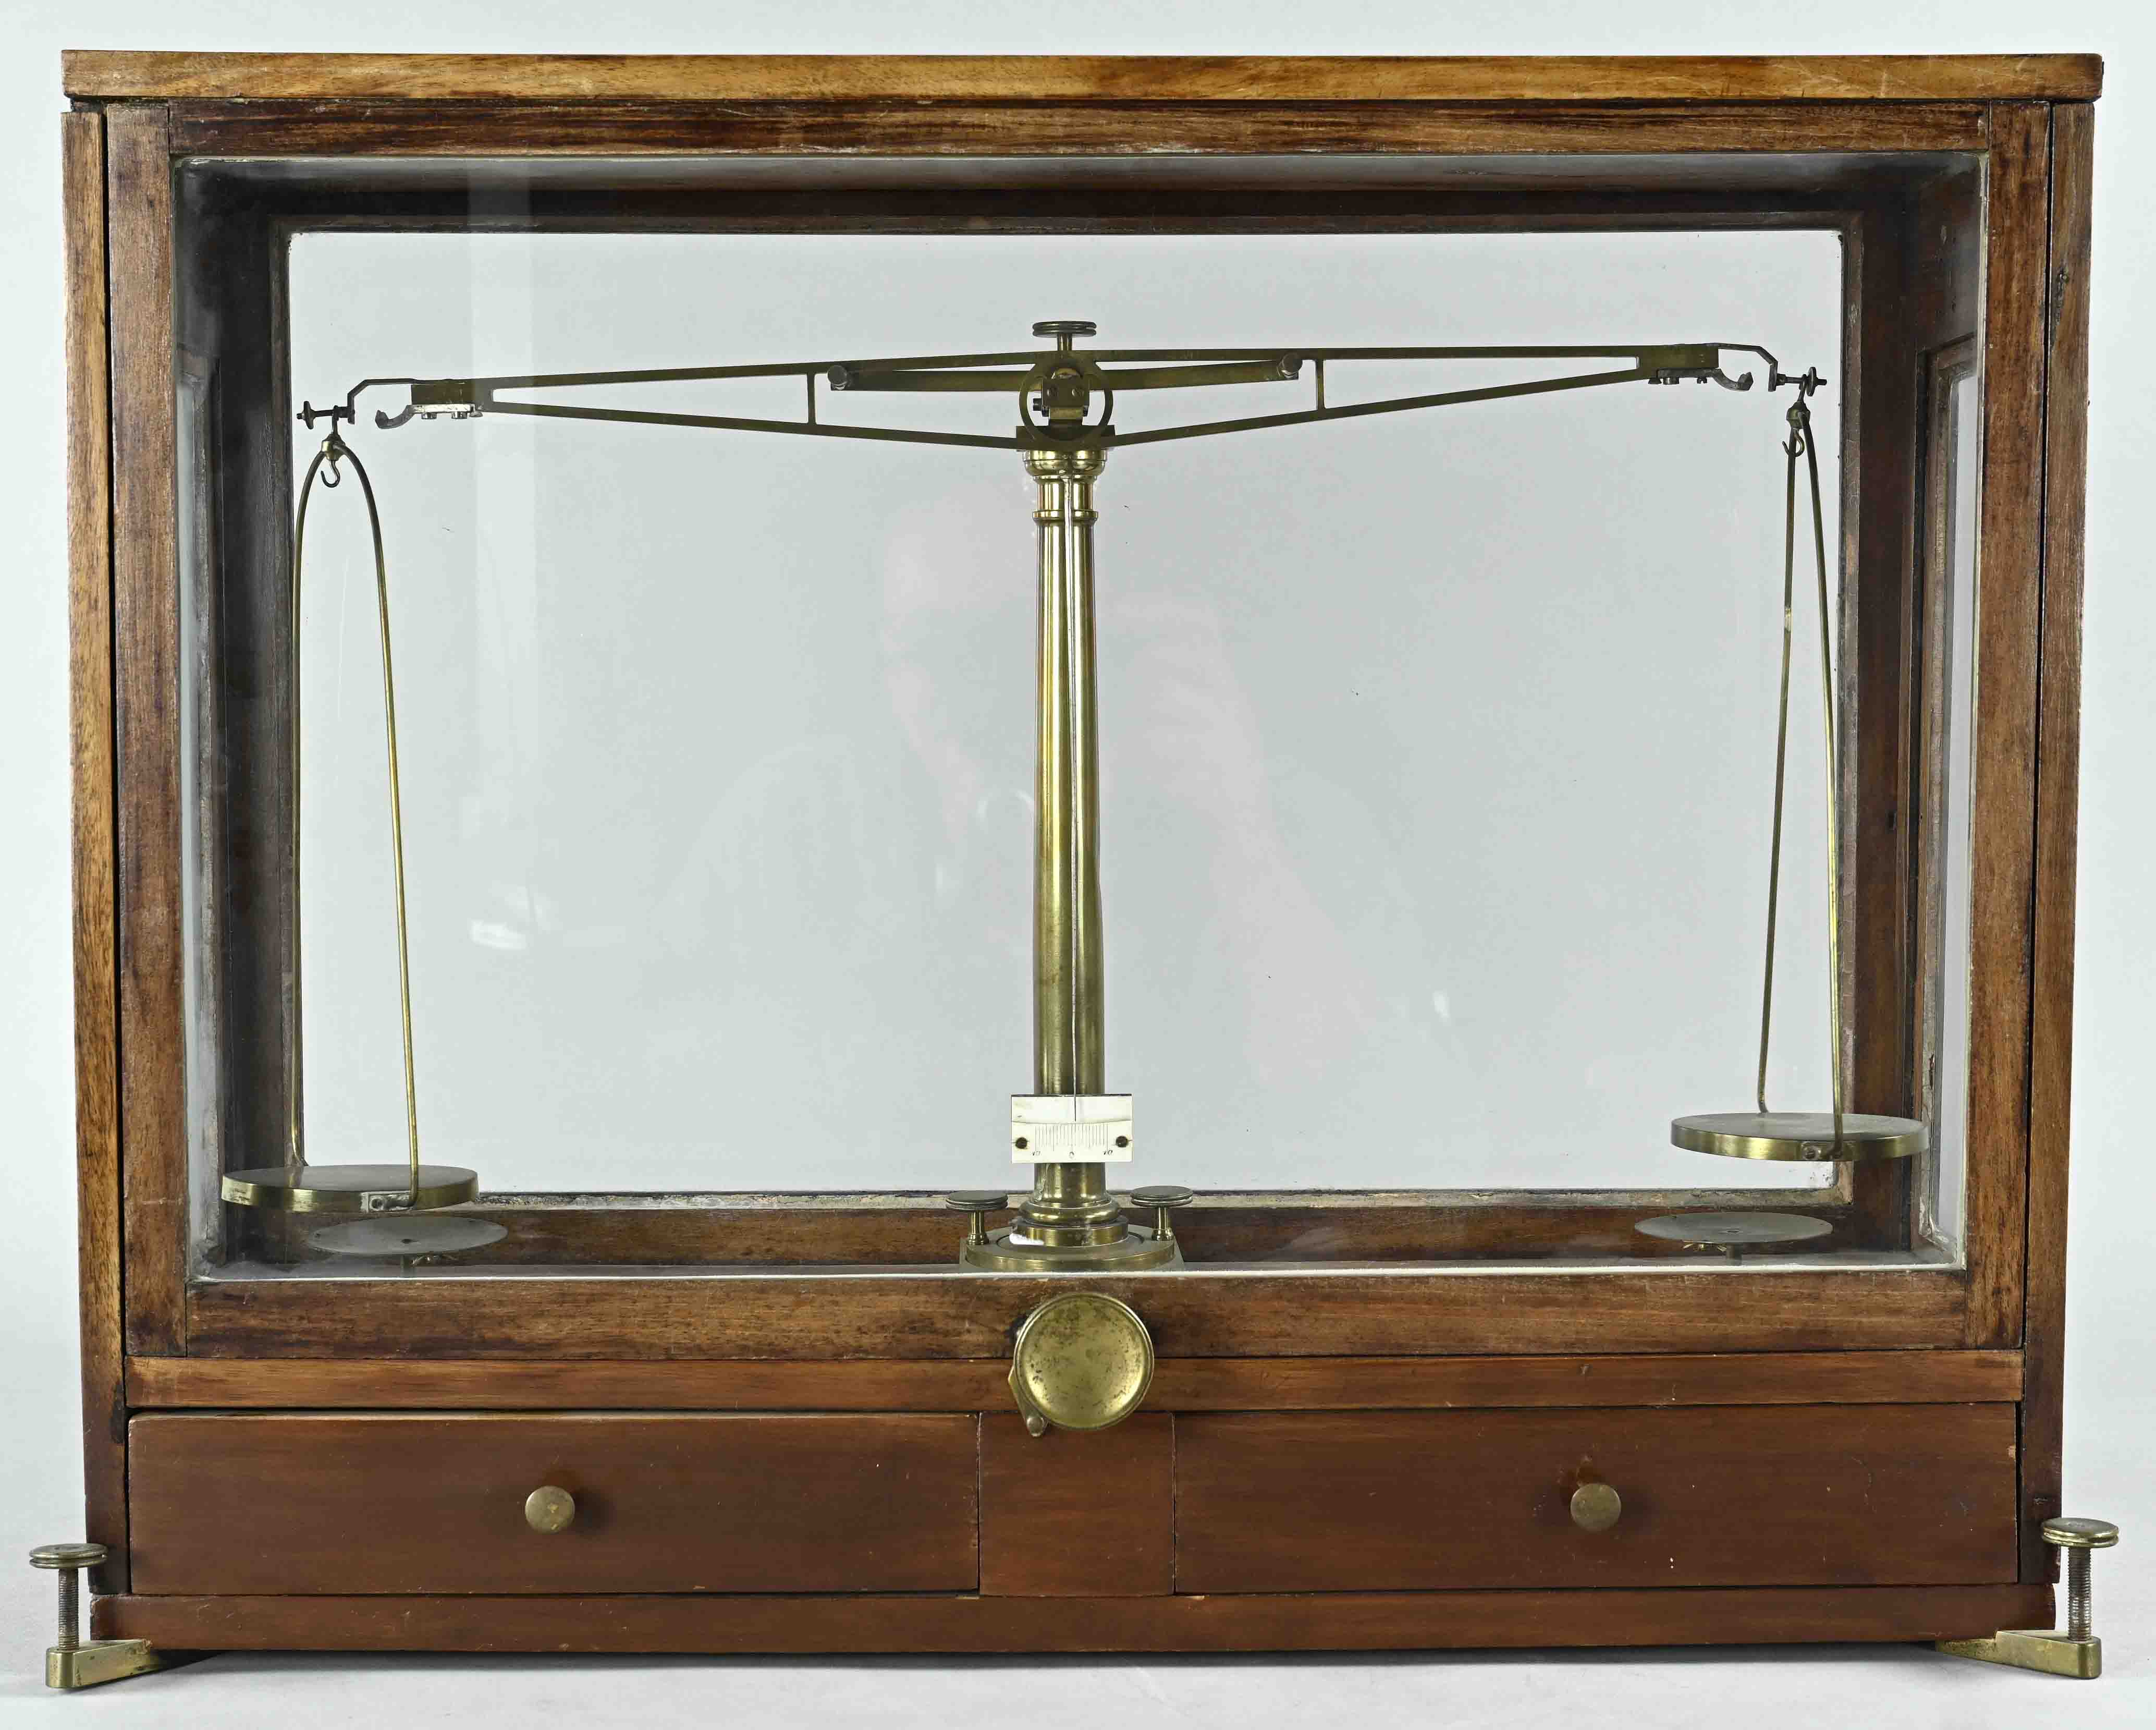 Precision balance, German, 2nd half of the 19th century, wood with glass case, height 48.5 x 60 x 1